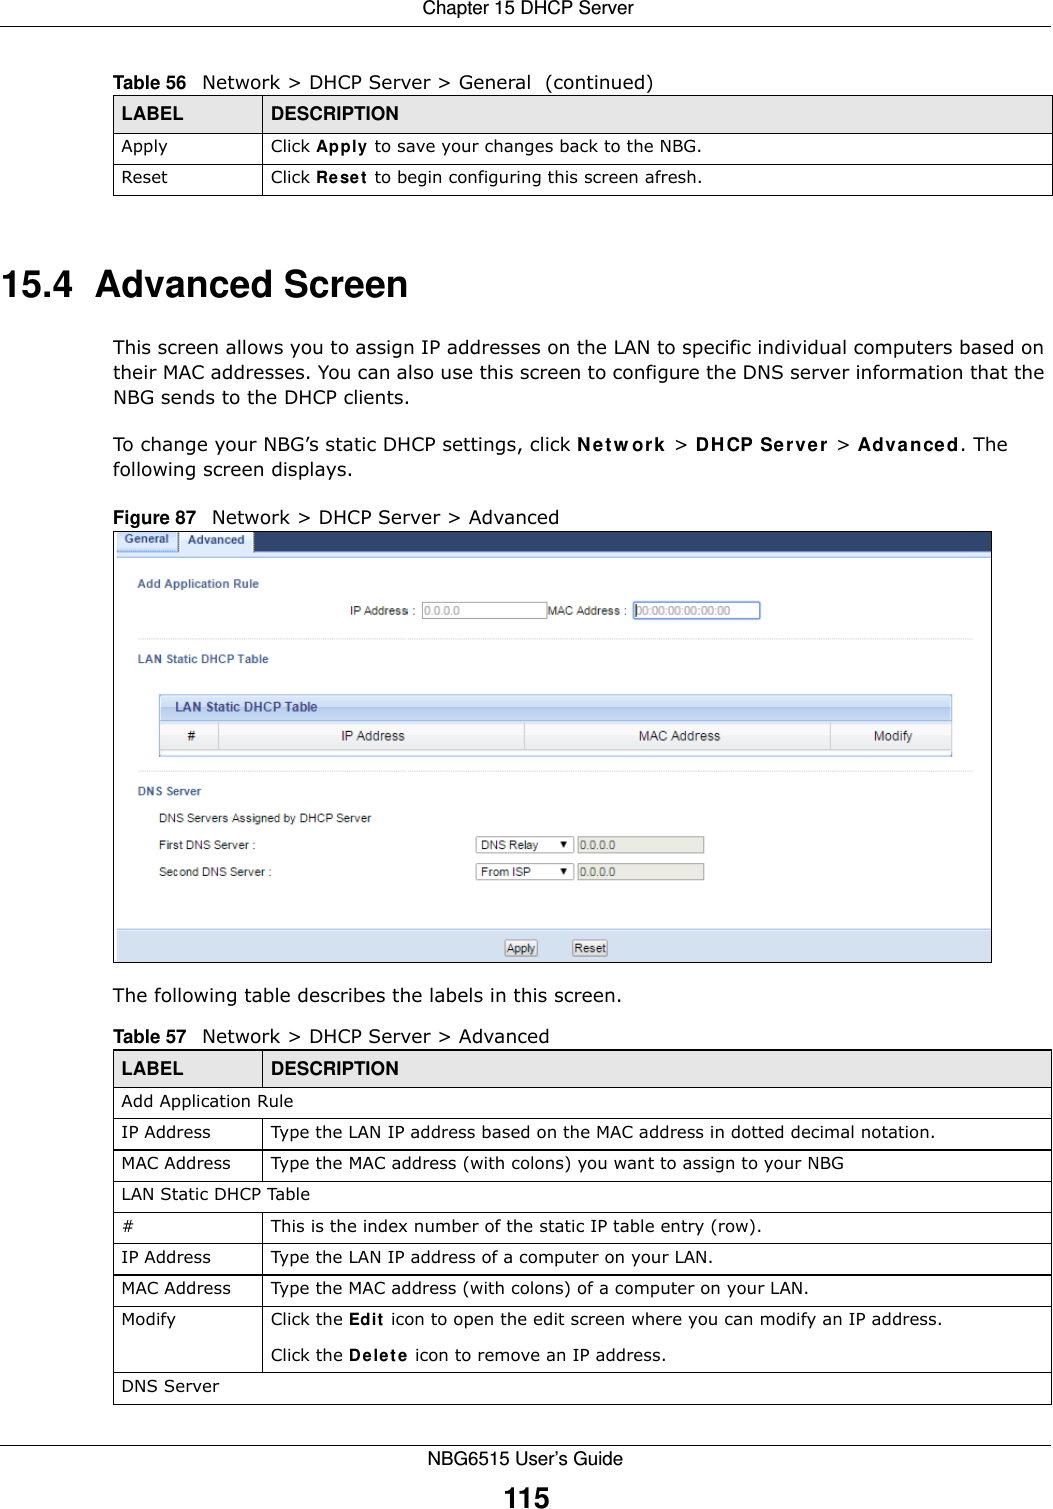  Chapter 15 DHCP ServerNBG6515 User’s Guide11515.4  Advanced Screen    This screen allows you to assign IP addresses on the LAN to specific individual computers based on their MAC addresses. You can also use this screen to configure the DNS server information that the NBG sends to the DHCP clients.To change your NBG’s static DHCP settings, click Network &gt; DHCP Server &gt; Advanced. The following screen displays.Figure 87   Network &gt; DHCP Server &gt; Advanced The following table describes the labels in this screen.Apply Click Apply to save your changes back to the NBG.Reset Click Reset to begin configuring this screen afresh.Table 56   Network &gt; DHCP Server &gt; General  (continued)LABEL DESCRIPTIONTable 57   Network &gt; DHCP Server &gt; AdvancedLABEL DESCRIPTIONAdd Application RuleIP Address Type the LAN IP address based on the MAC address in dotted decimal notation.MAC Address Type the MAC address (with colons) you want to assign to your NBGLAN Static DHCP Table# This is the index number of the static IP table entry (row).IP Address Type the LAN IP address of a computer on your LAN.MAC Address Type the MAC address (with colons) of a computer on your LAN.Modify Click the Edit icon to open the edit screen where you can modify an IP address. Click the Delete icon to remove an IP address.DNS Server